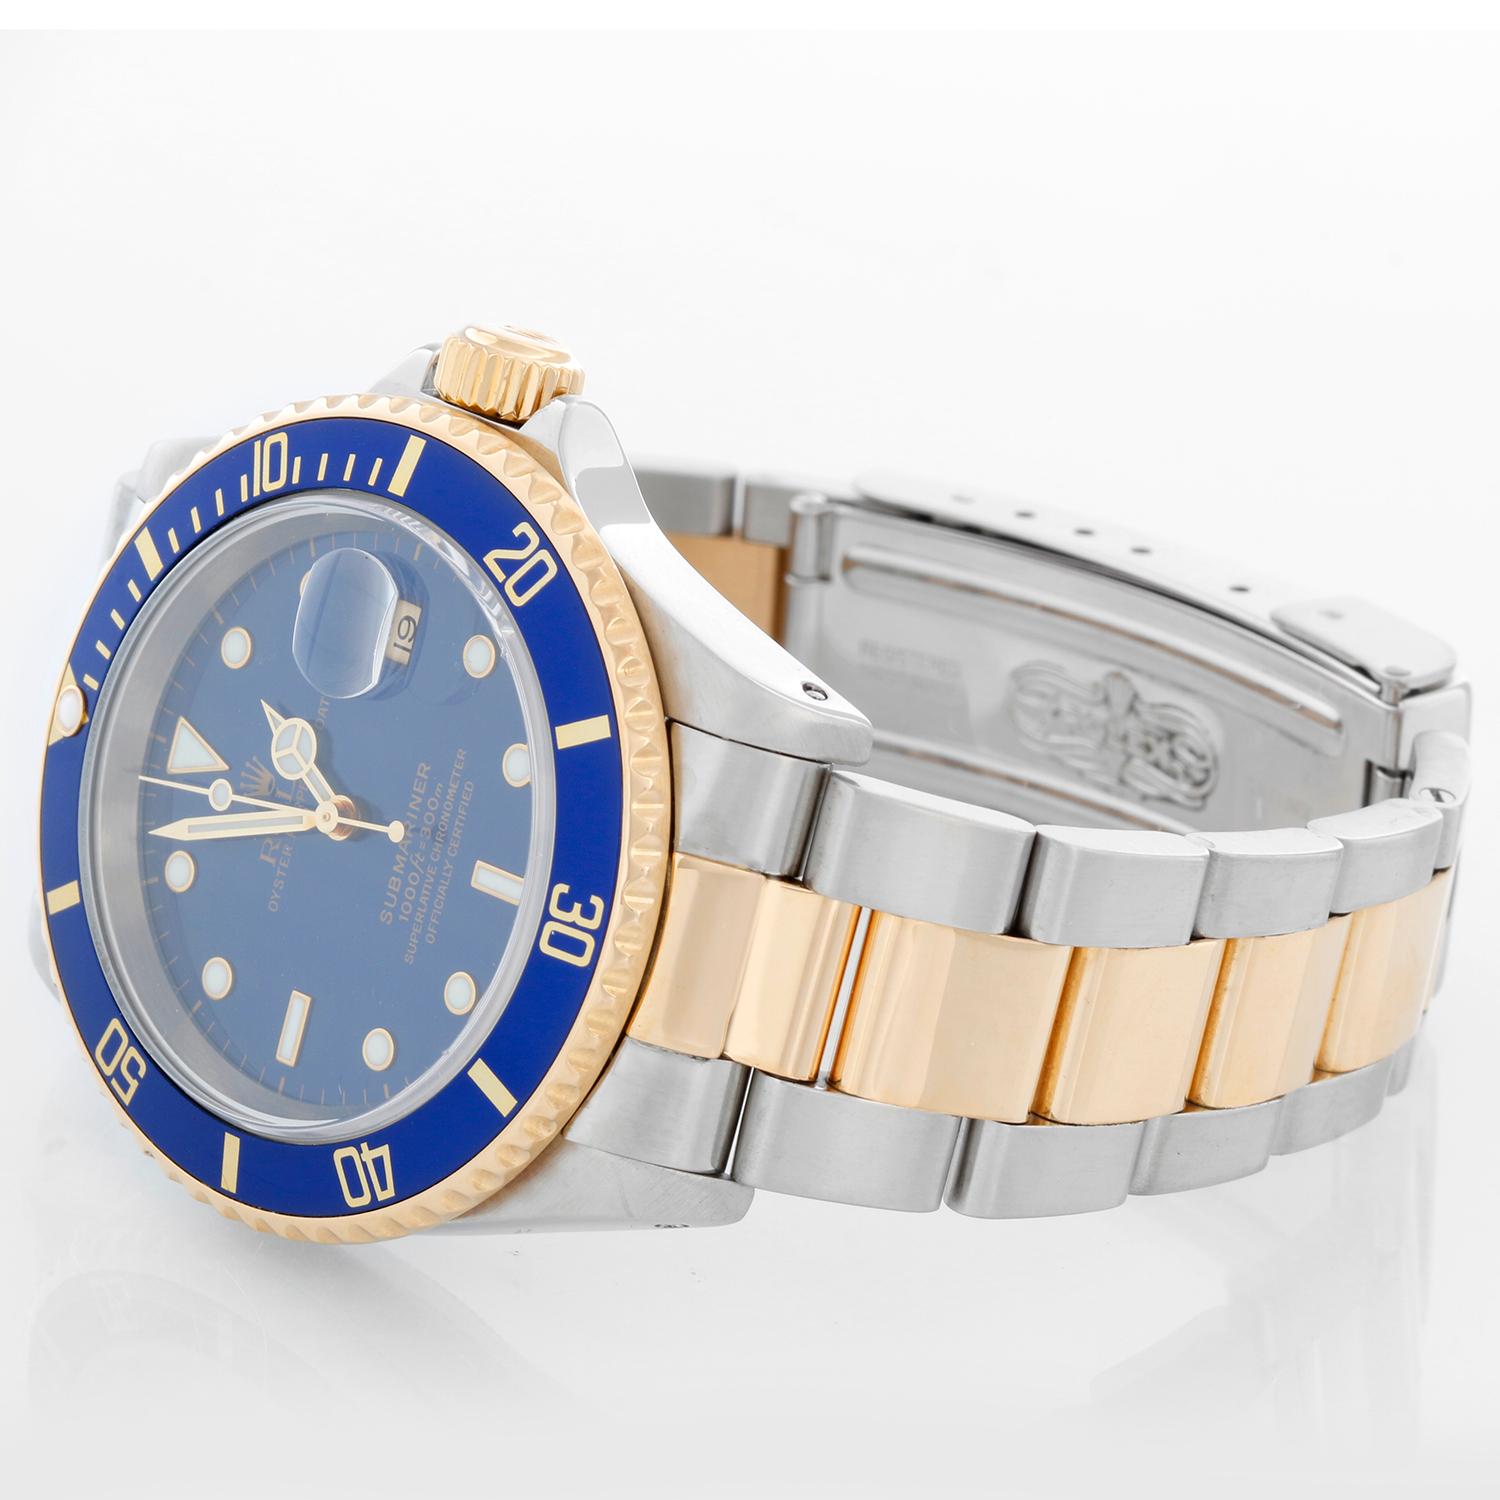 Rolex Submariner 2-Tone Steel & Gold Men's Watch 16613 - Automatic winding. Stainless steel case with gold rotating bezel with blue insert. Blue dial . Rolex oyster bracelet. Pre-owned with custom box.